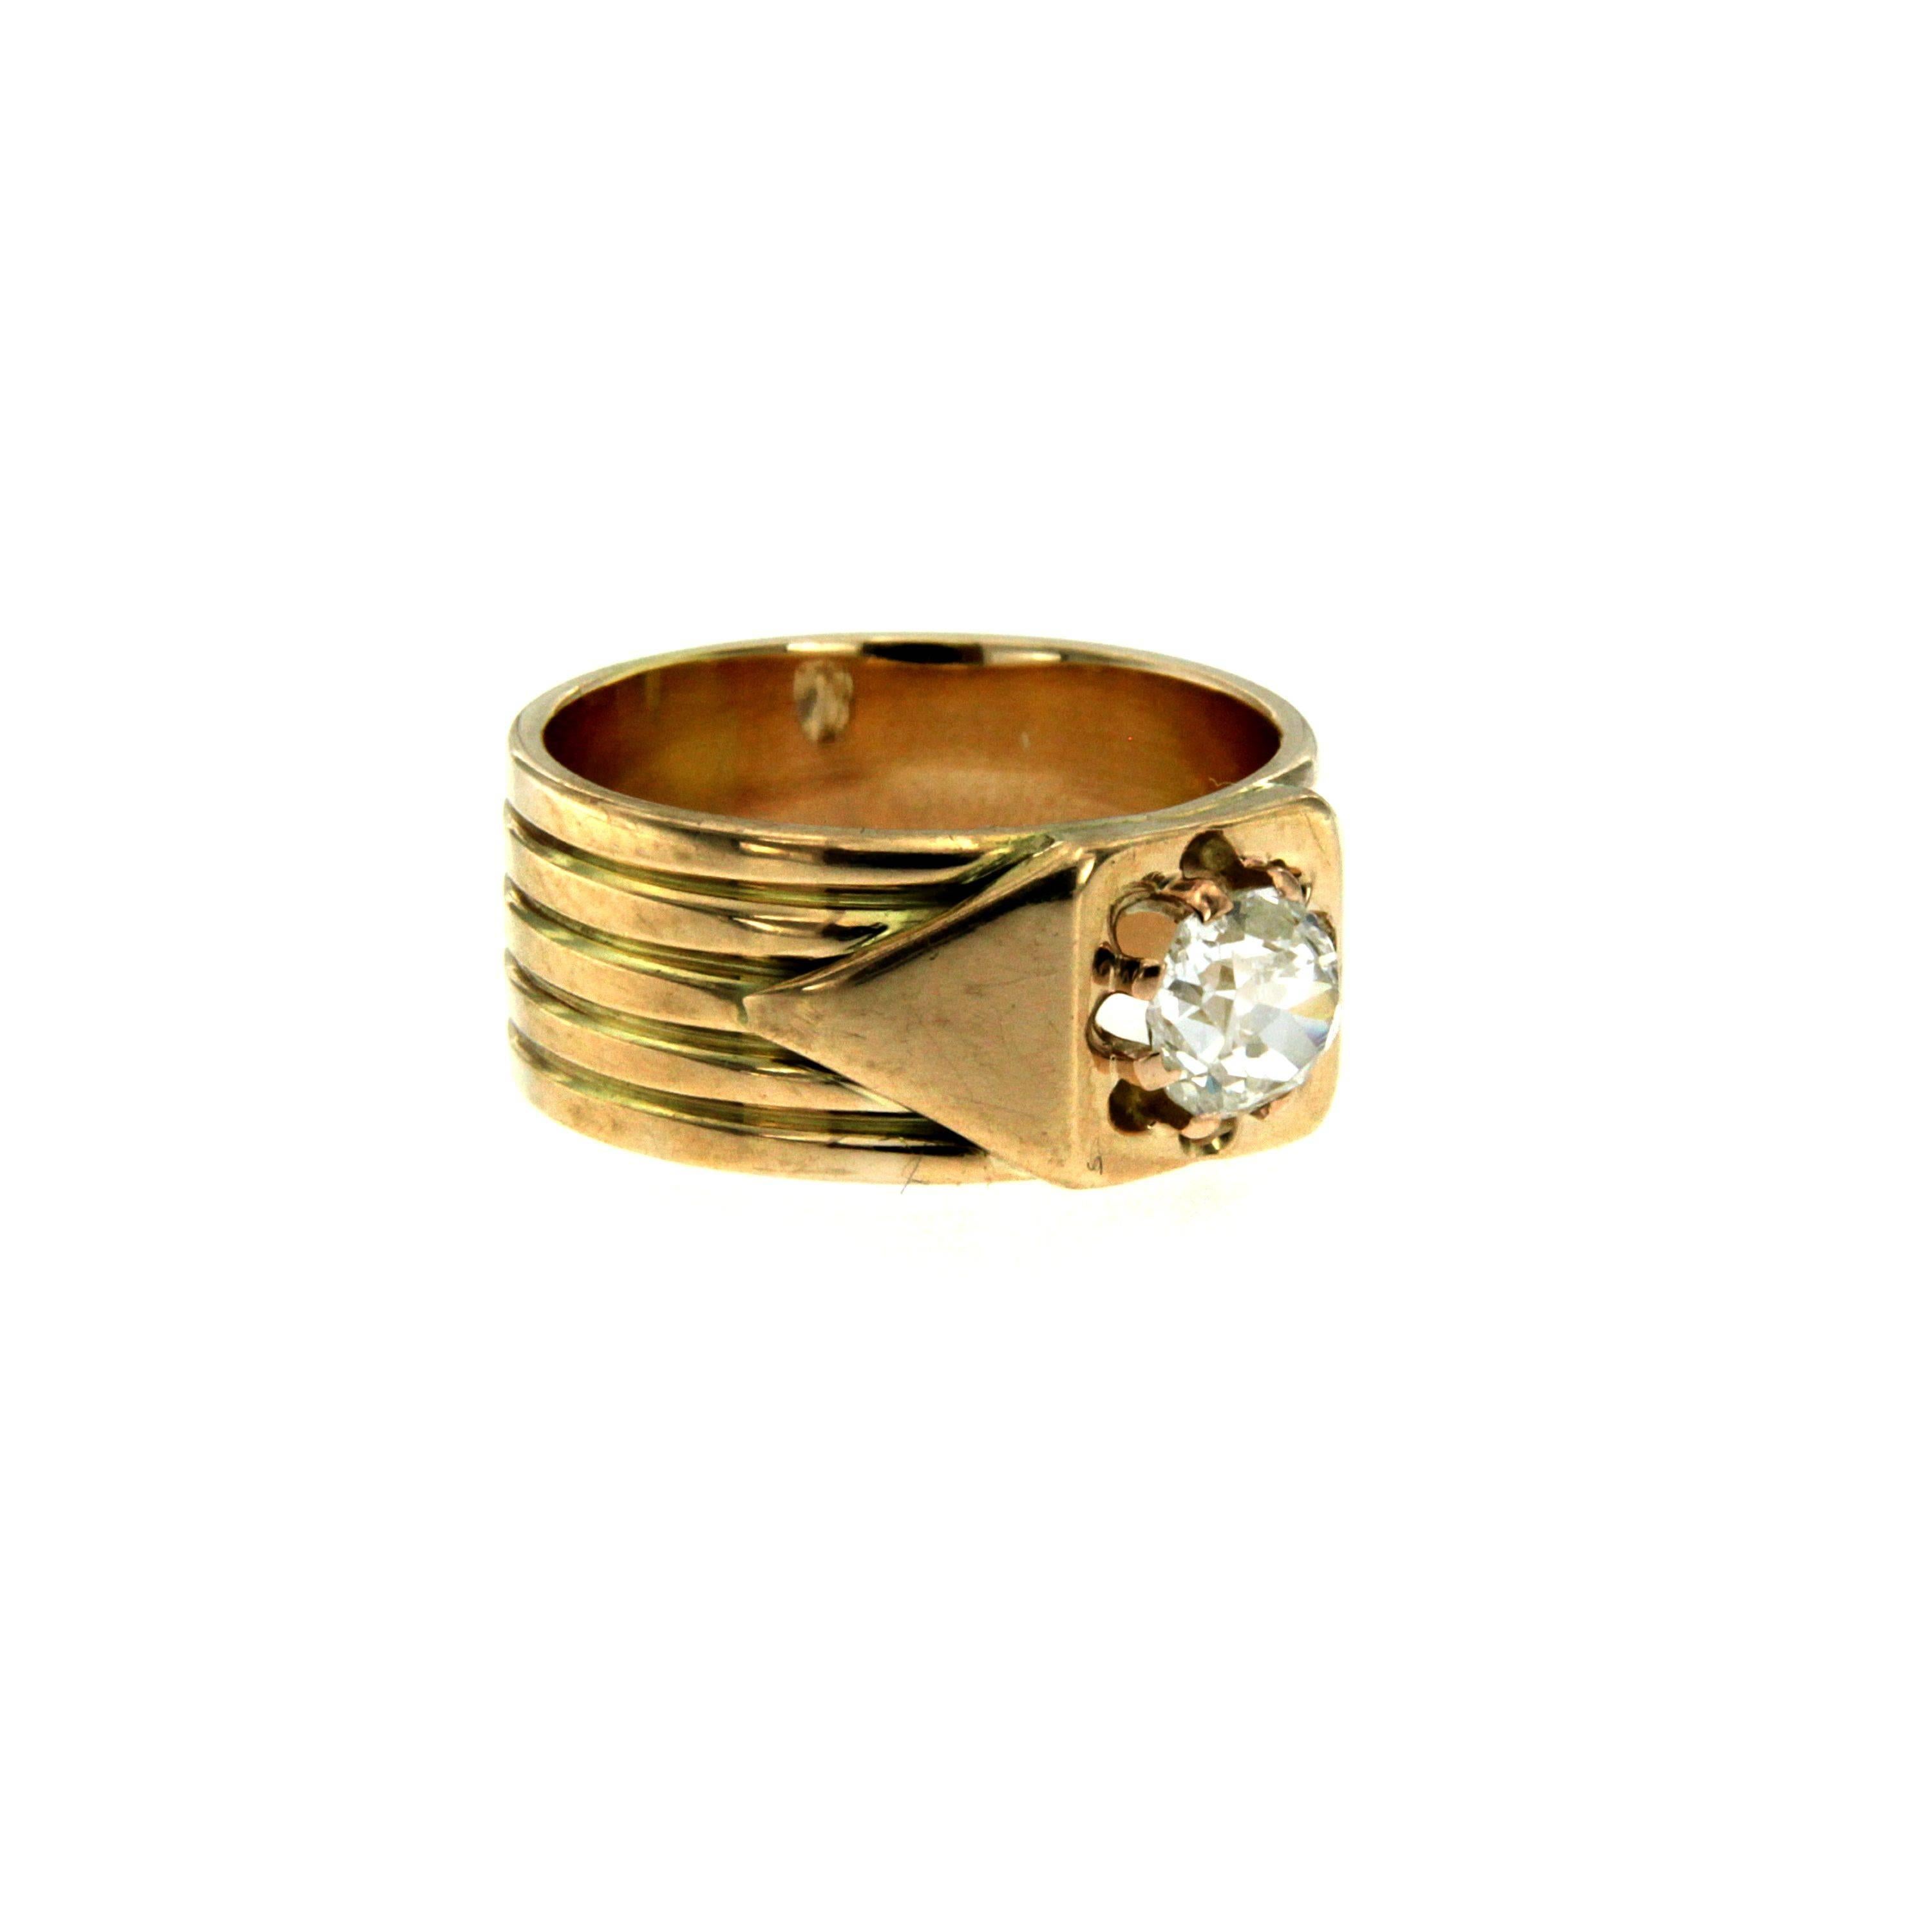 A gorgeous Retro band ring handcrafted in 18k yellow Gold and set with a sparkling 0.70 ct. old mine cut diamond I color VS. Circa 1950

CONDITION: Pre-Owned - Excellent 
METAL: 18k yellow Gold
GEM STONE: Diamond 0.70 total carats 
DESIGN ERA: Retro